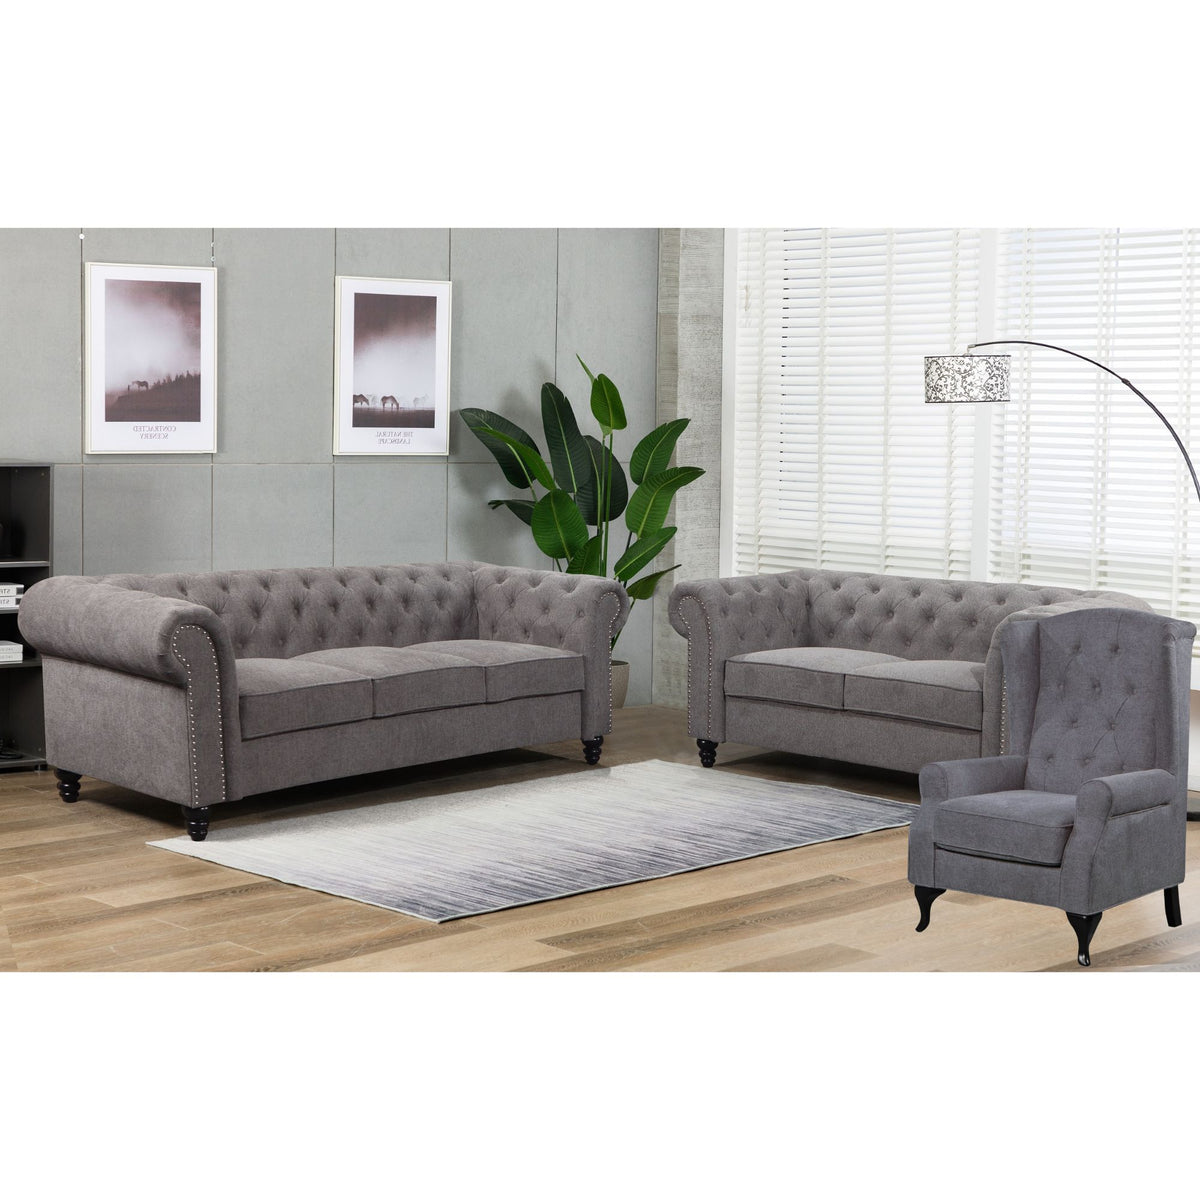 Kiho Chesterfield Fabric Upholstered 3 Seater Sofa  - Grey - Notbrand